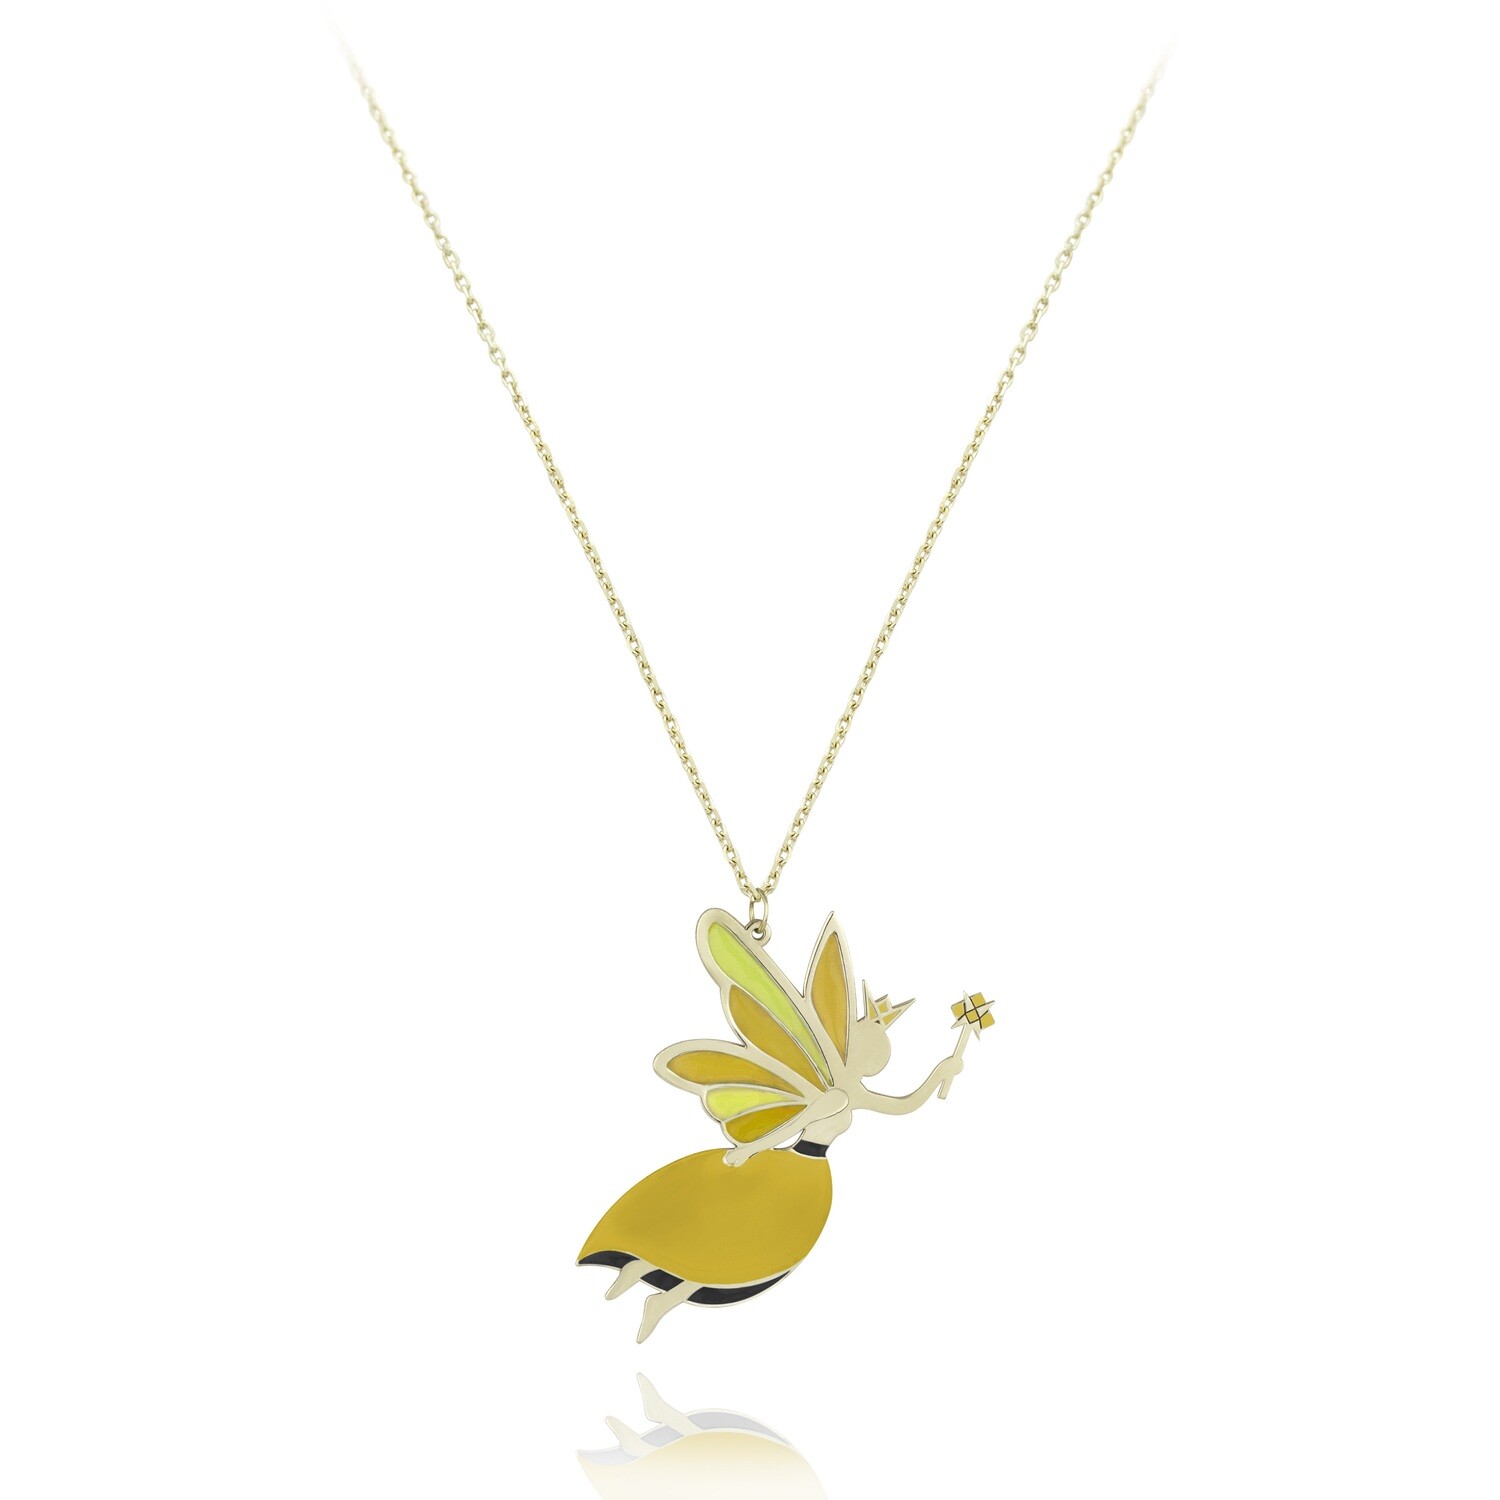 Fairy Tale Gold Necklace with Enamel